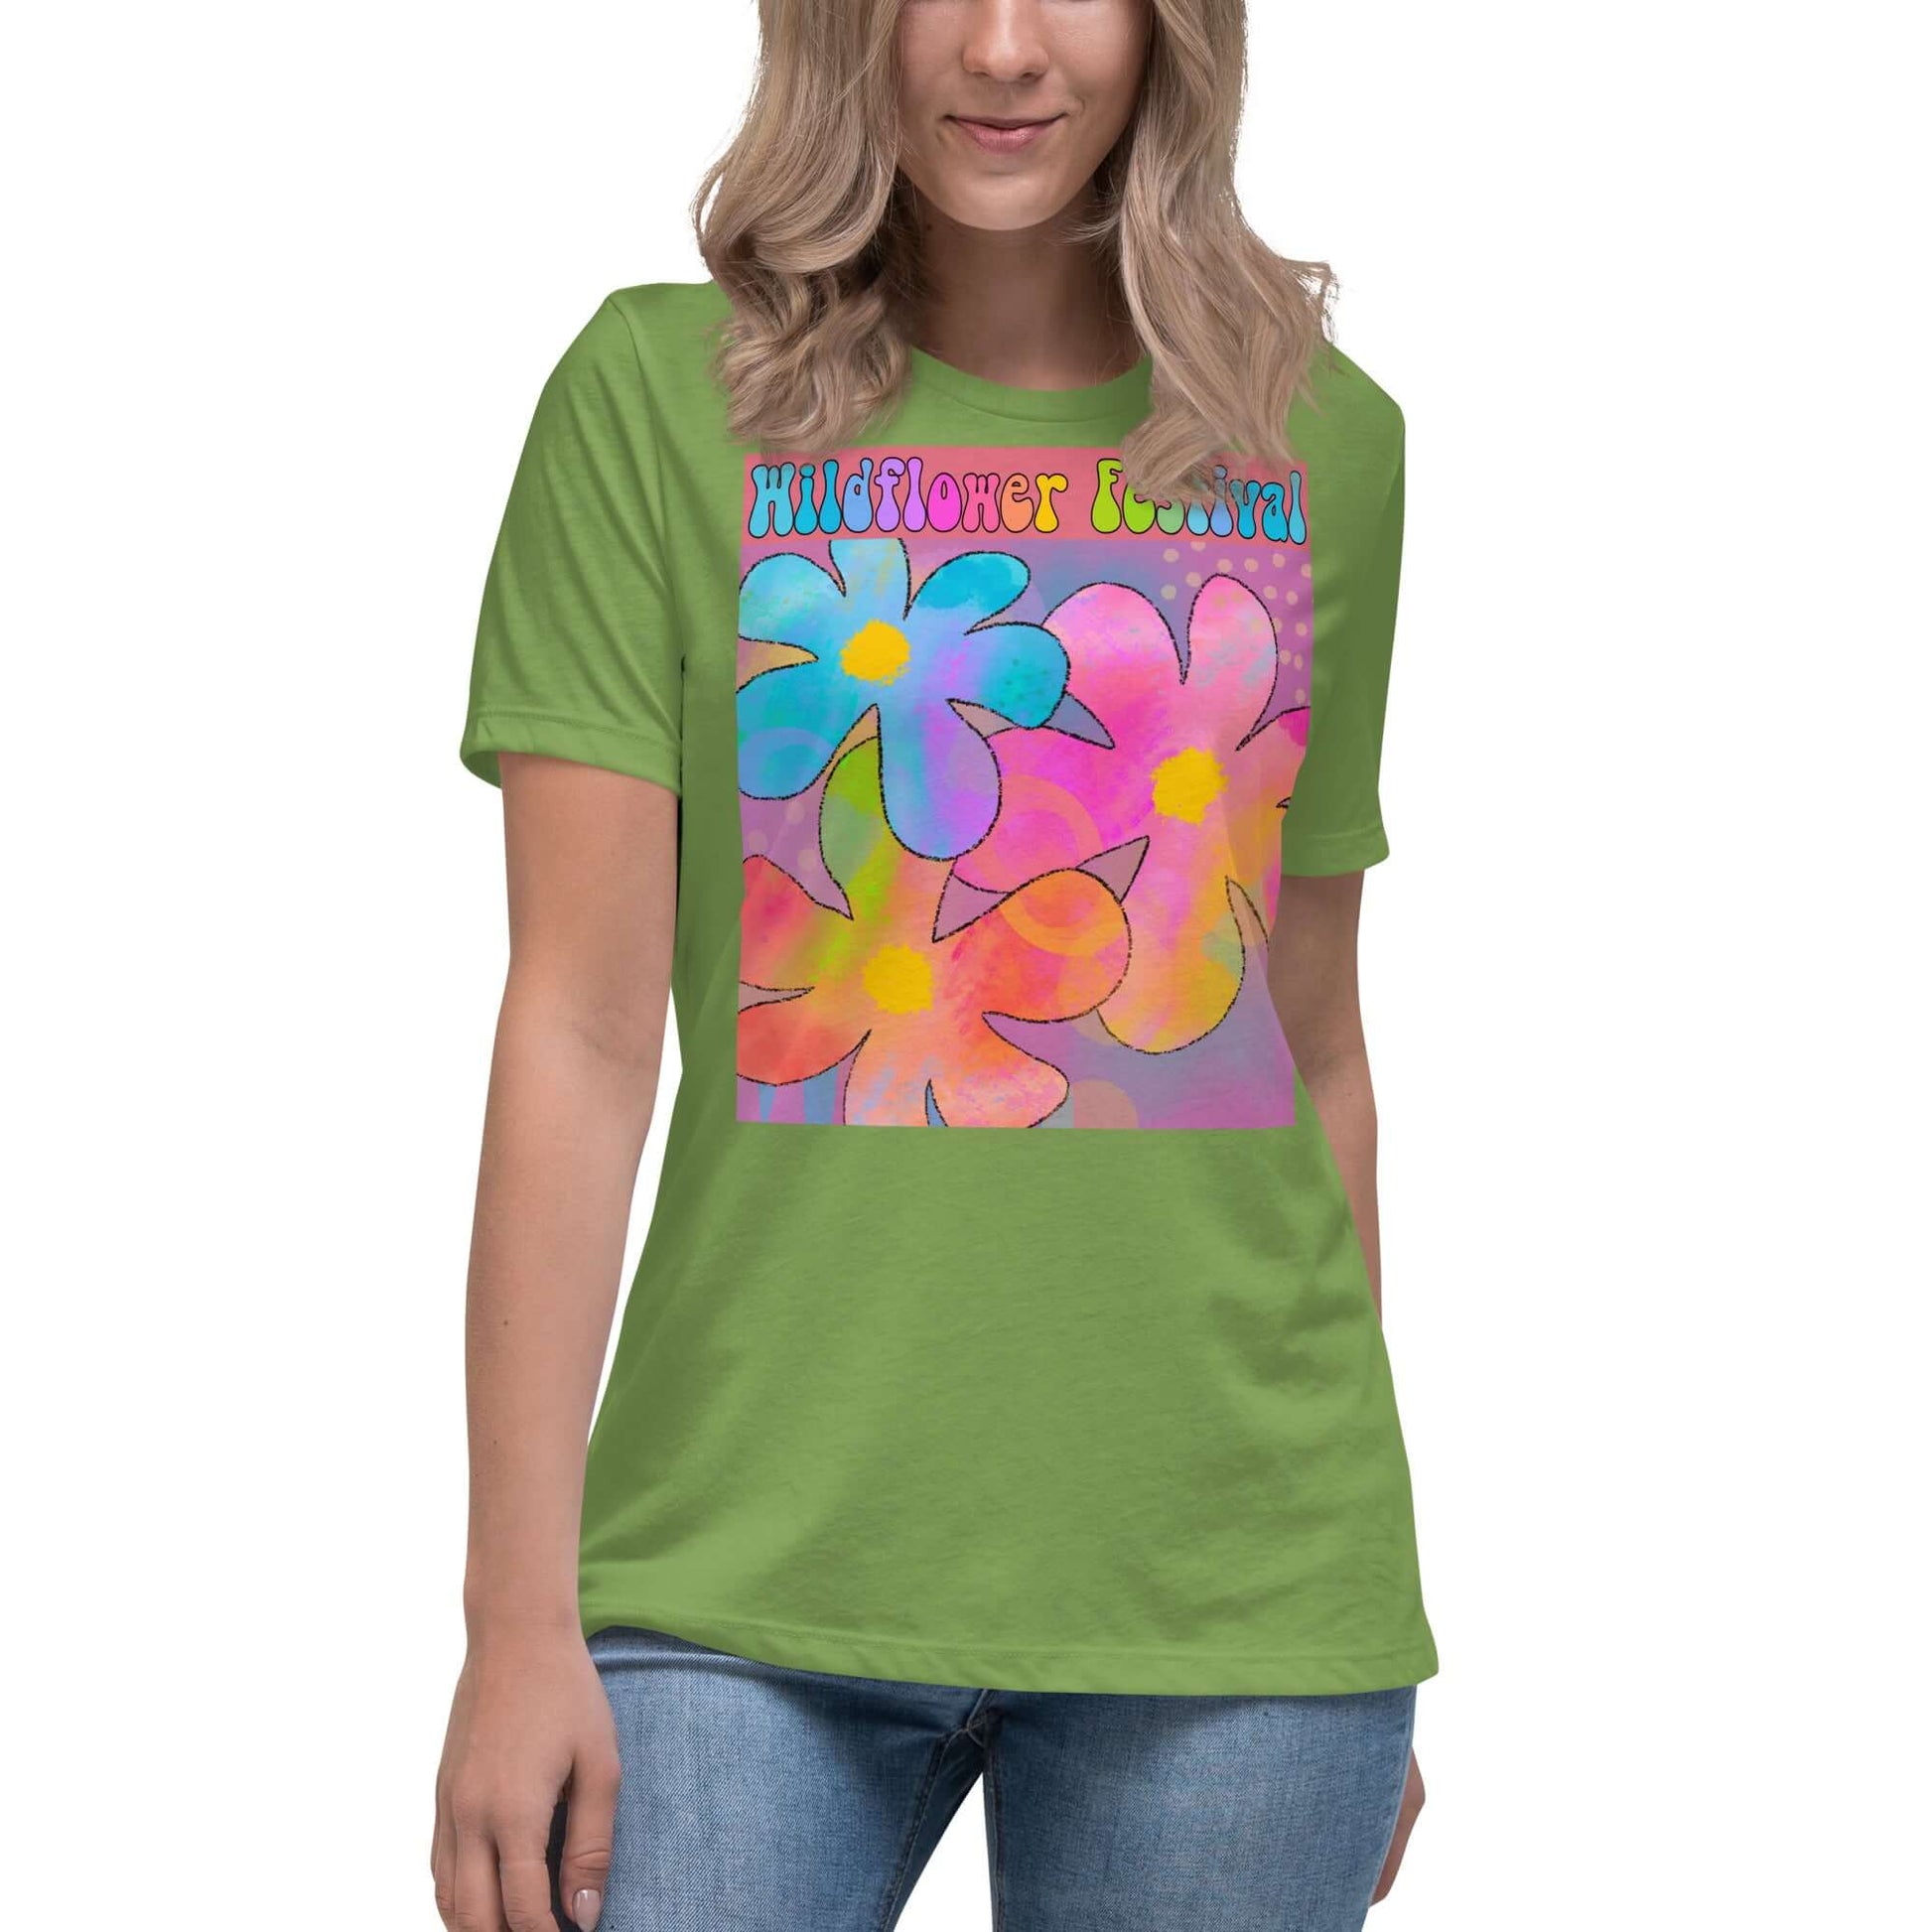 Big Colorful Hippie 1960s Psychedelic Flowers with Text “Wildflower Festival” Women’s Short Sleeve Tee in Leaf Green